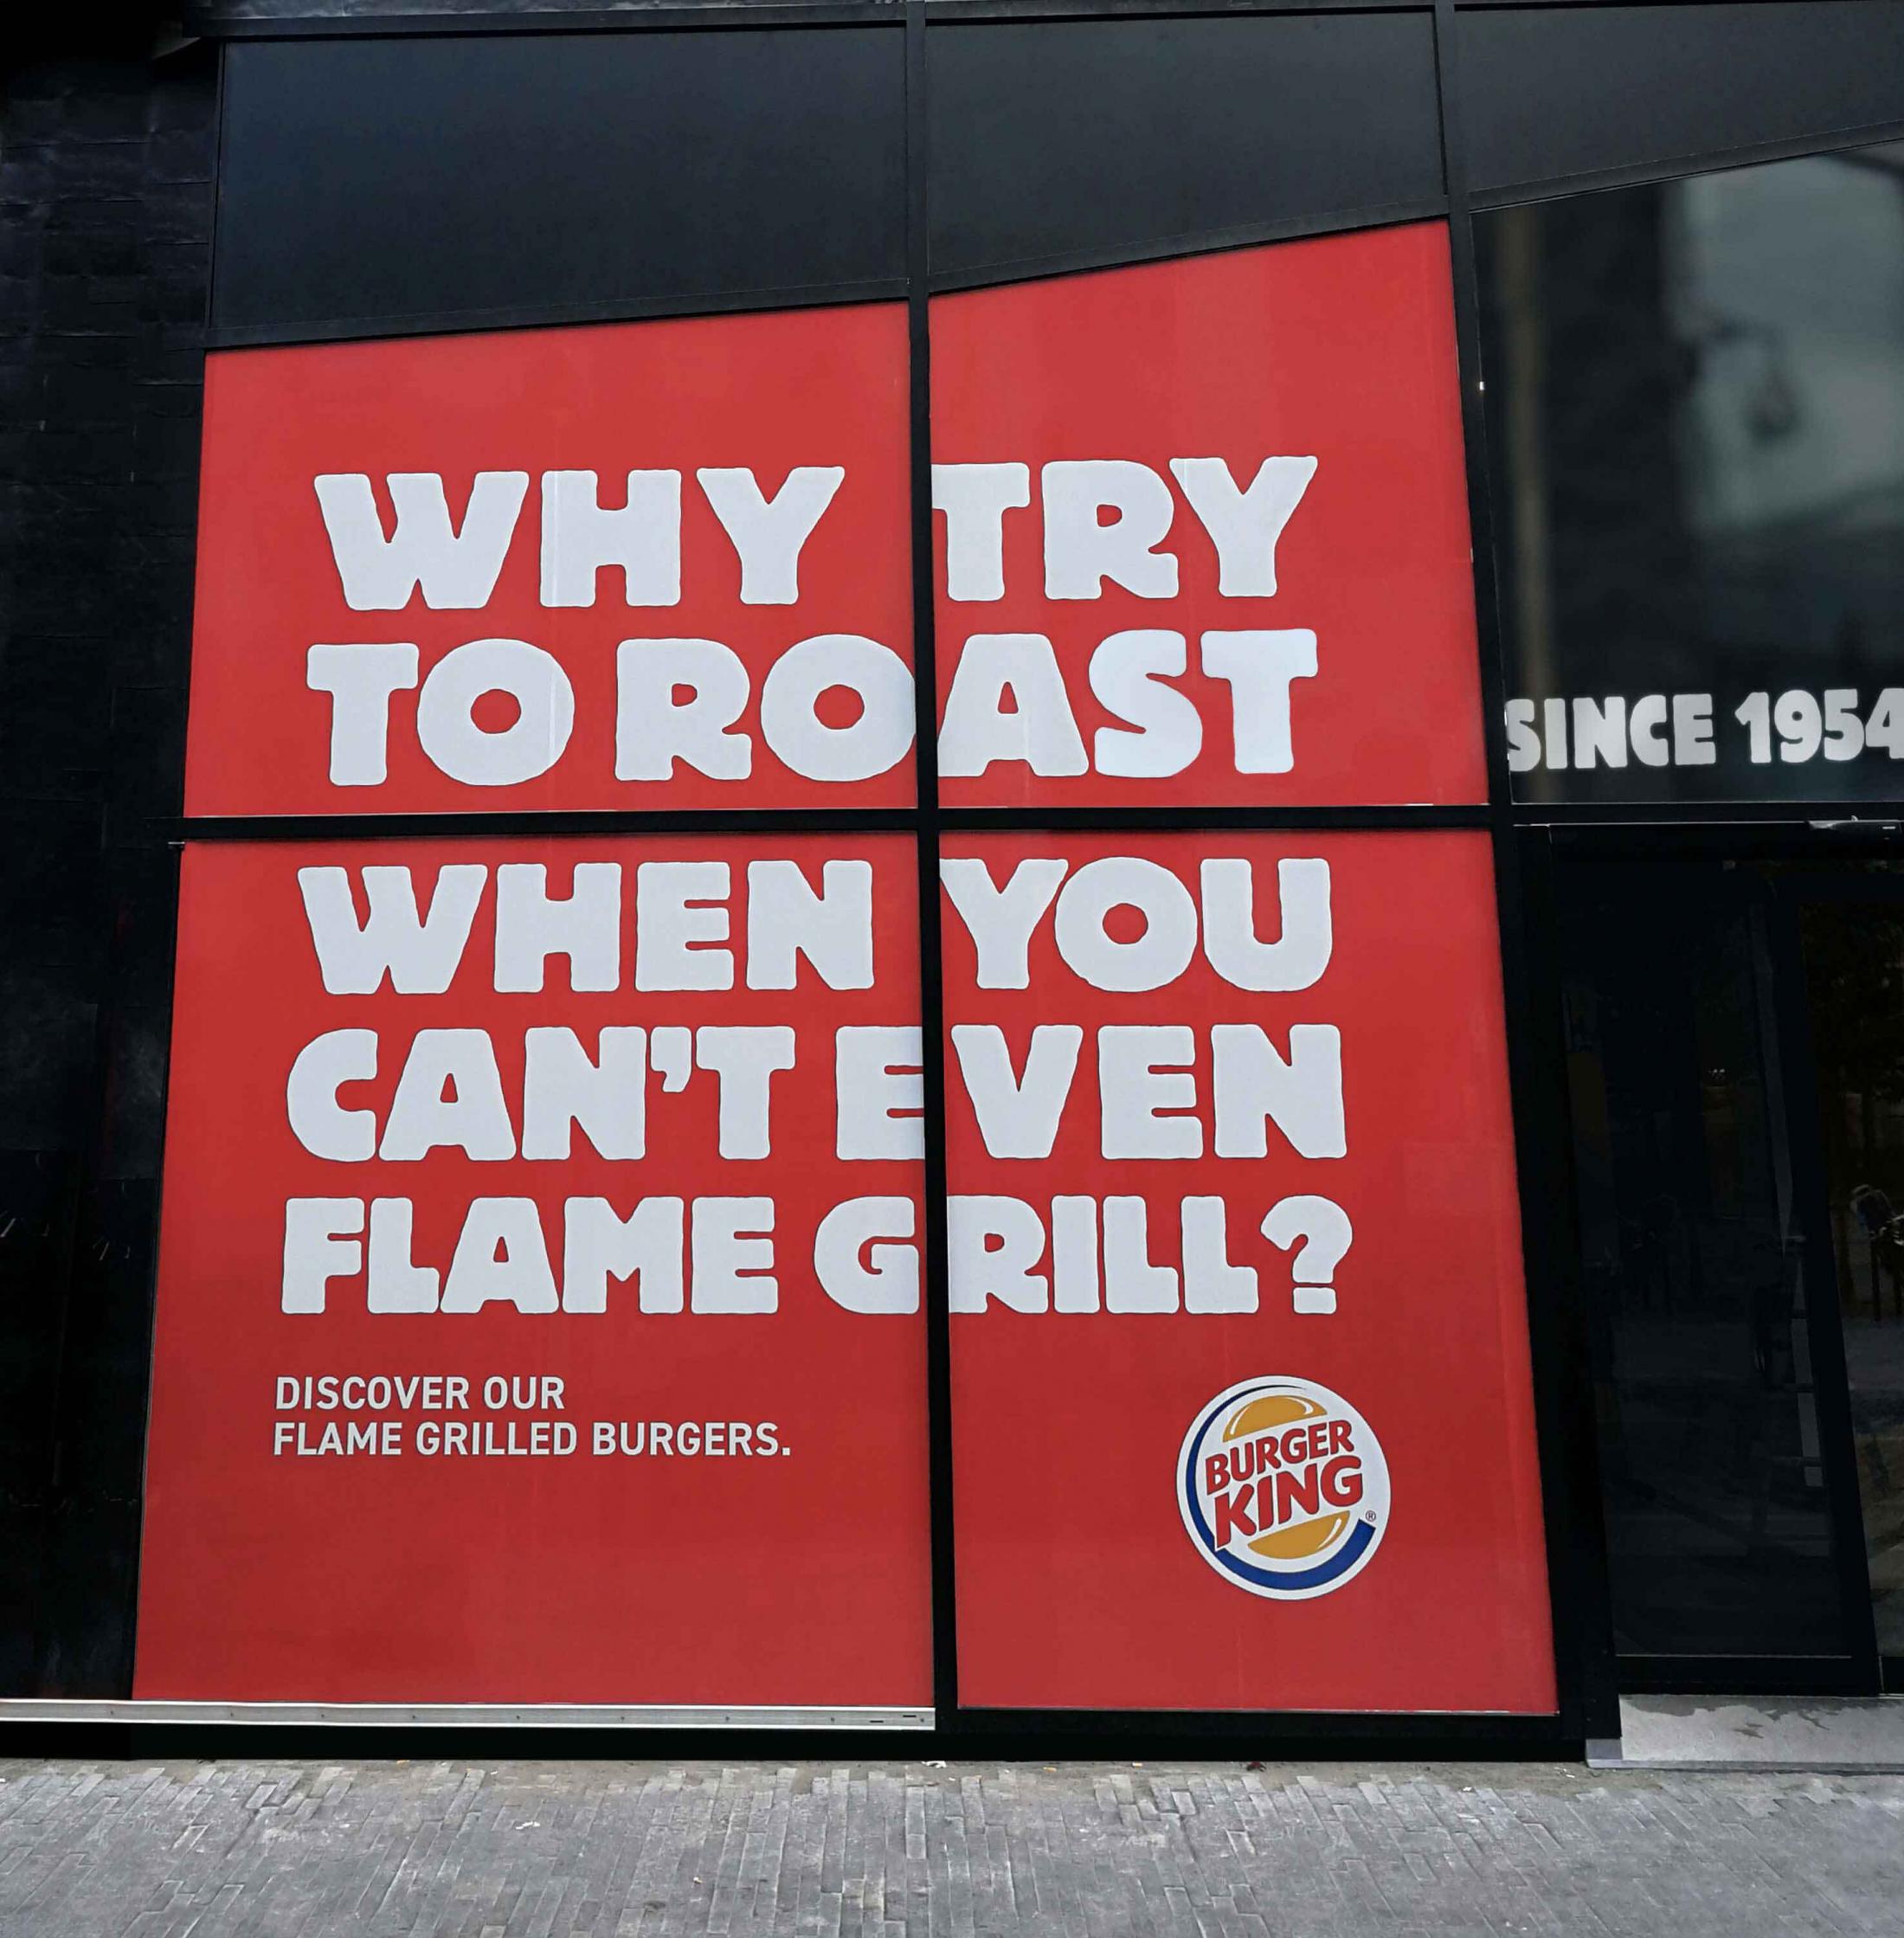 Hangover Whopper - Burger King's Hilarious campaign